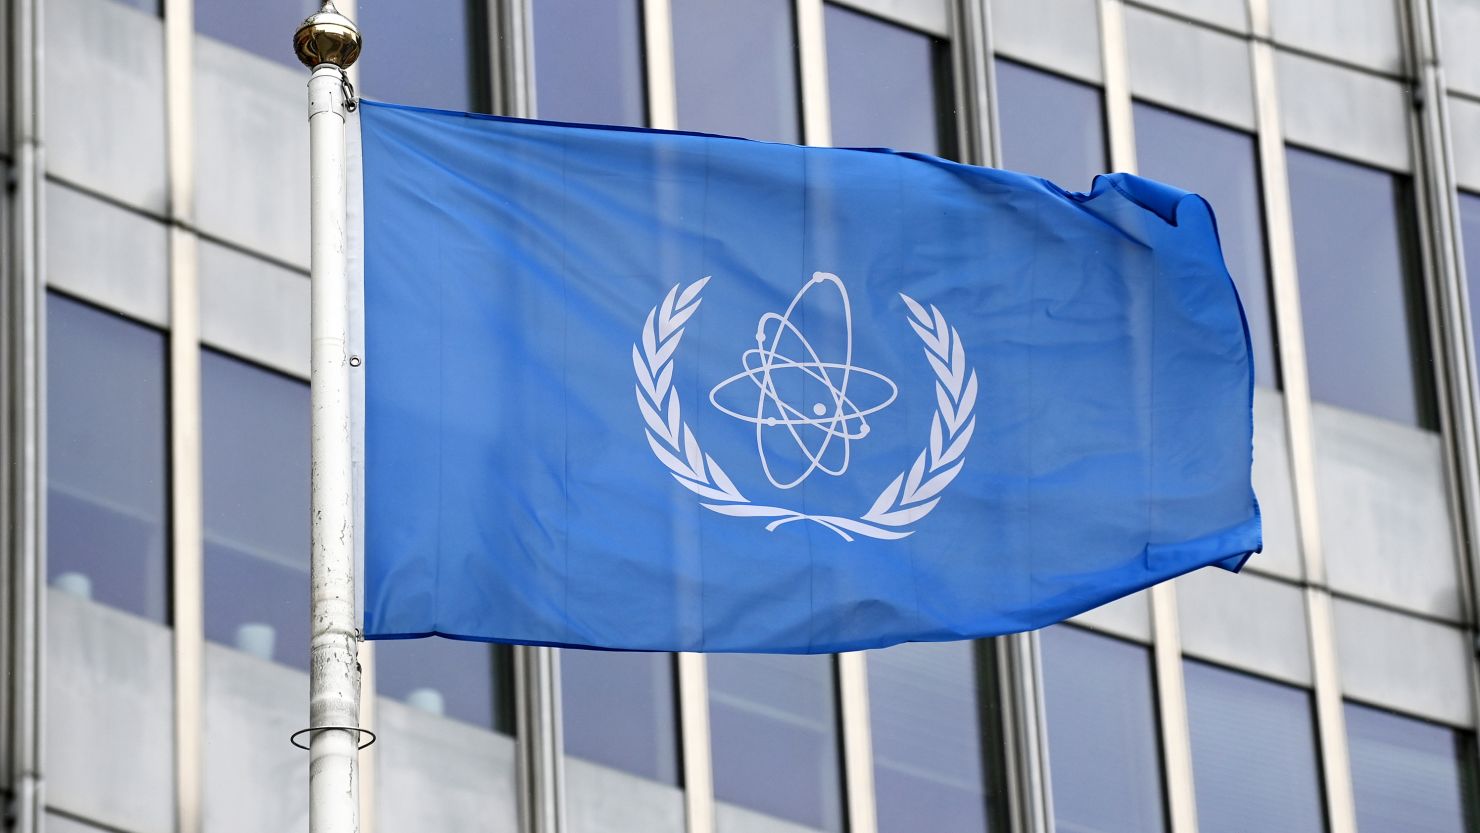 IAEA inspectors said the missing uranium was in 10 drums previously reported in Libya.